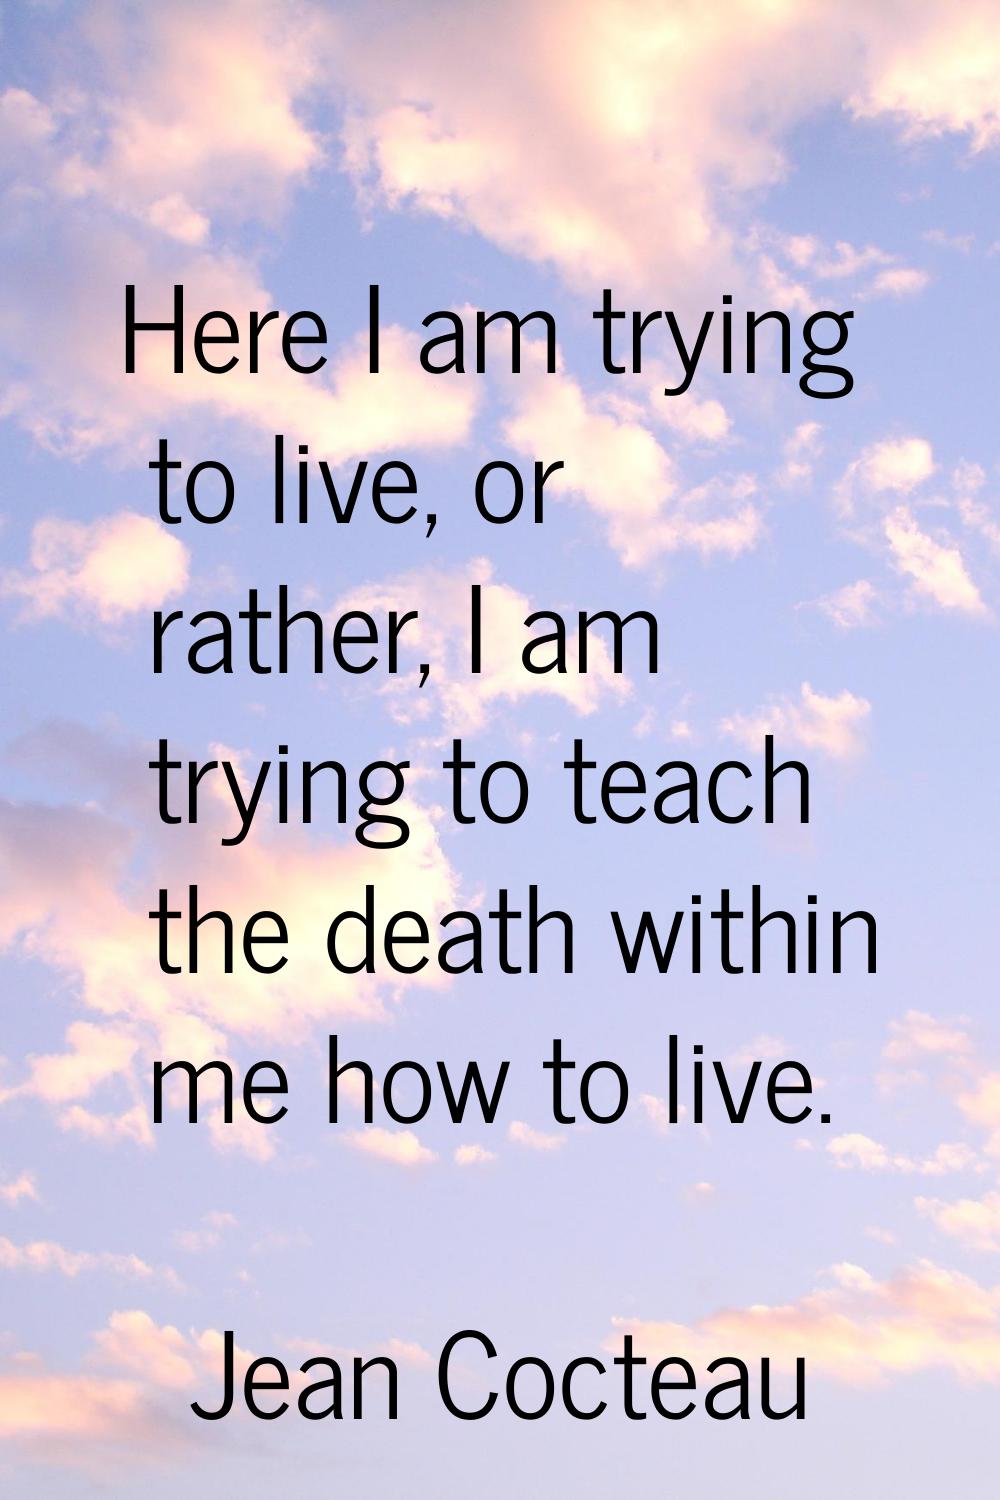 Here I am trying to live, or rather, I am trying to teach the death within me how to live.